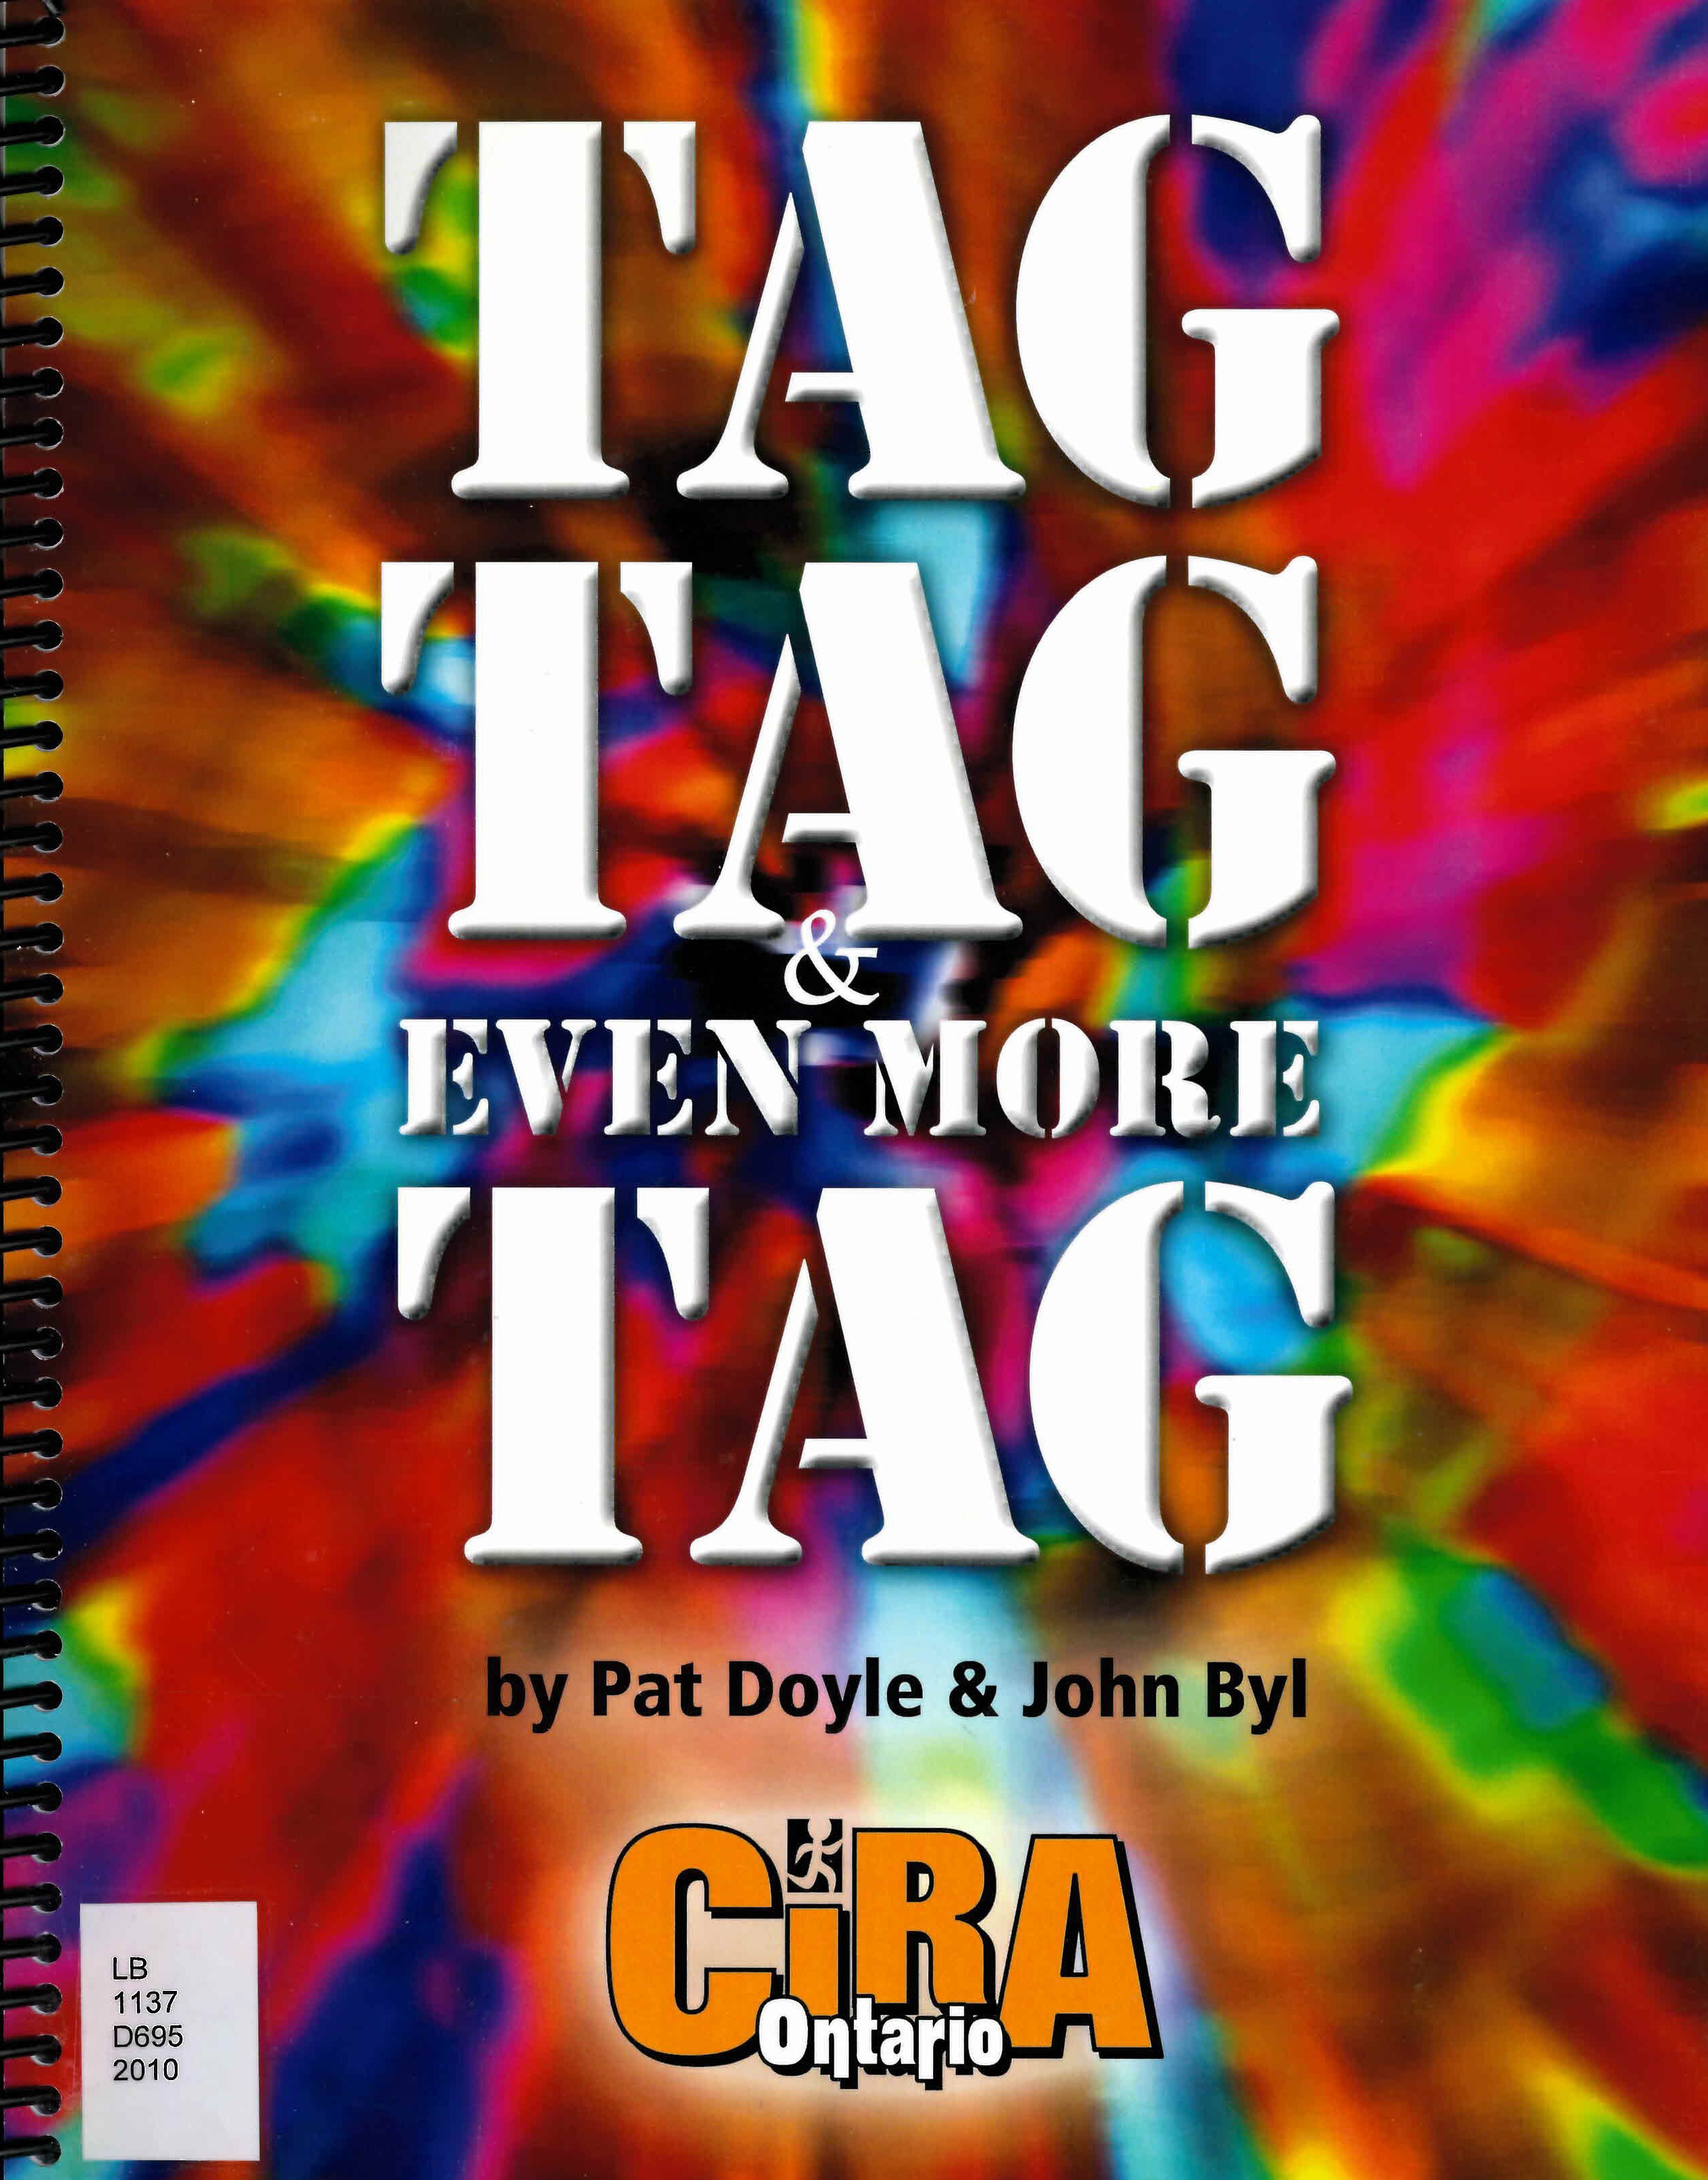 Tag, tag & even more tag